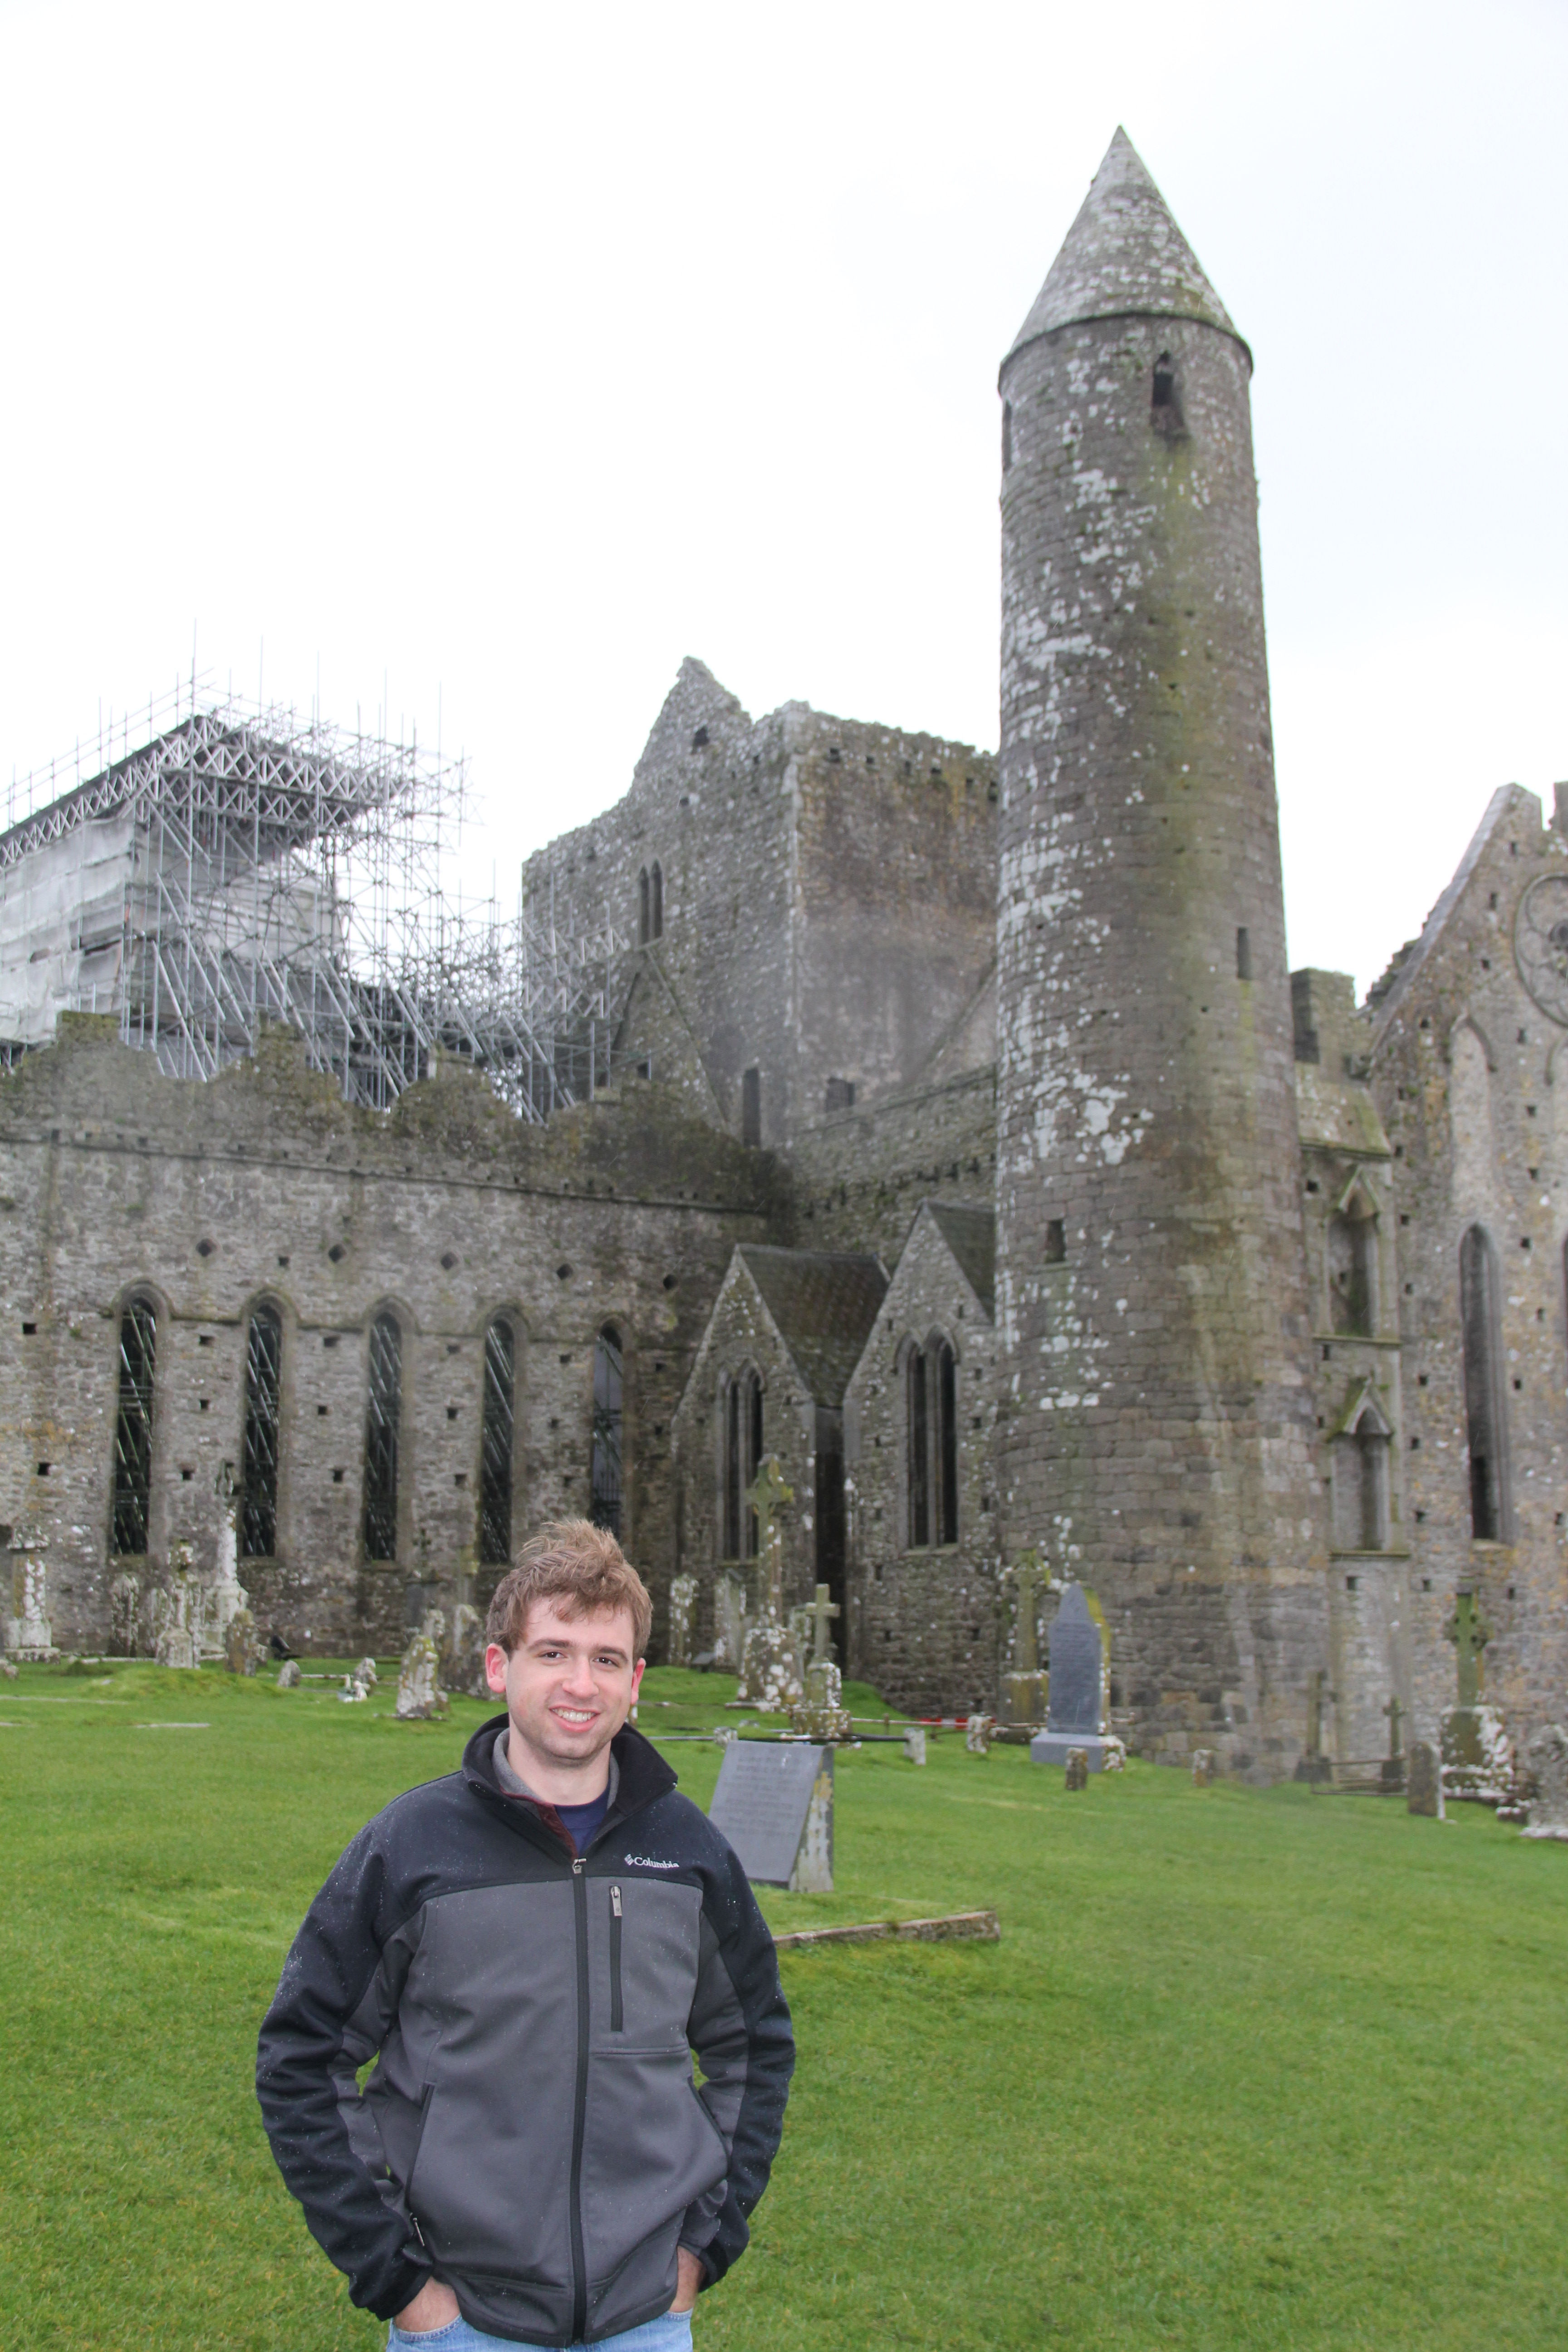 Accounting senior Michael Oleis traveled to Ireland during his six-month internship as an associate auditor for FedEx Domestic Express. The position also required him to work in various spots throughout the U.S. and India.